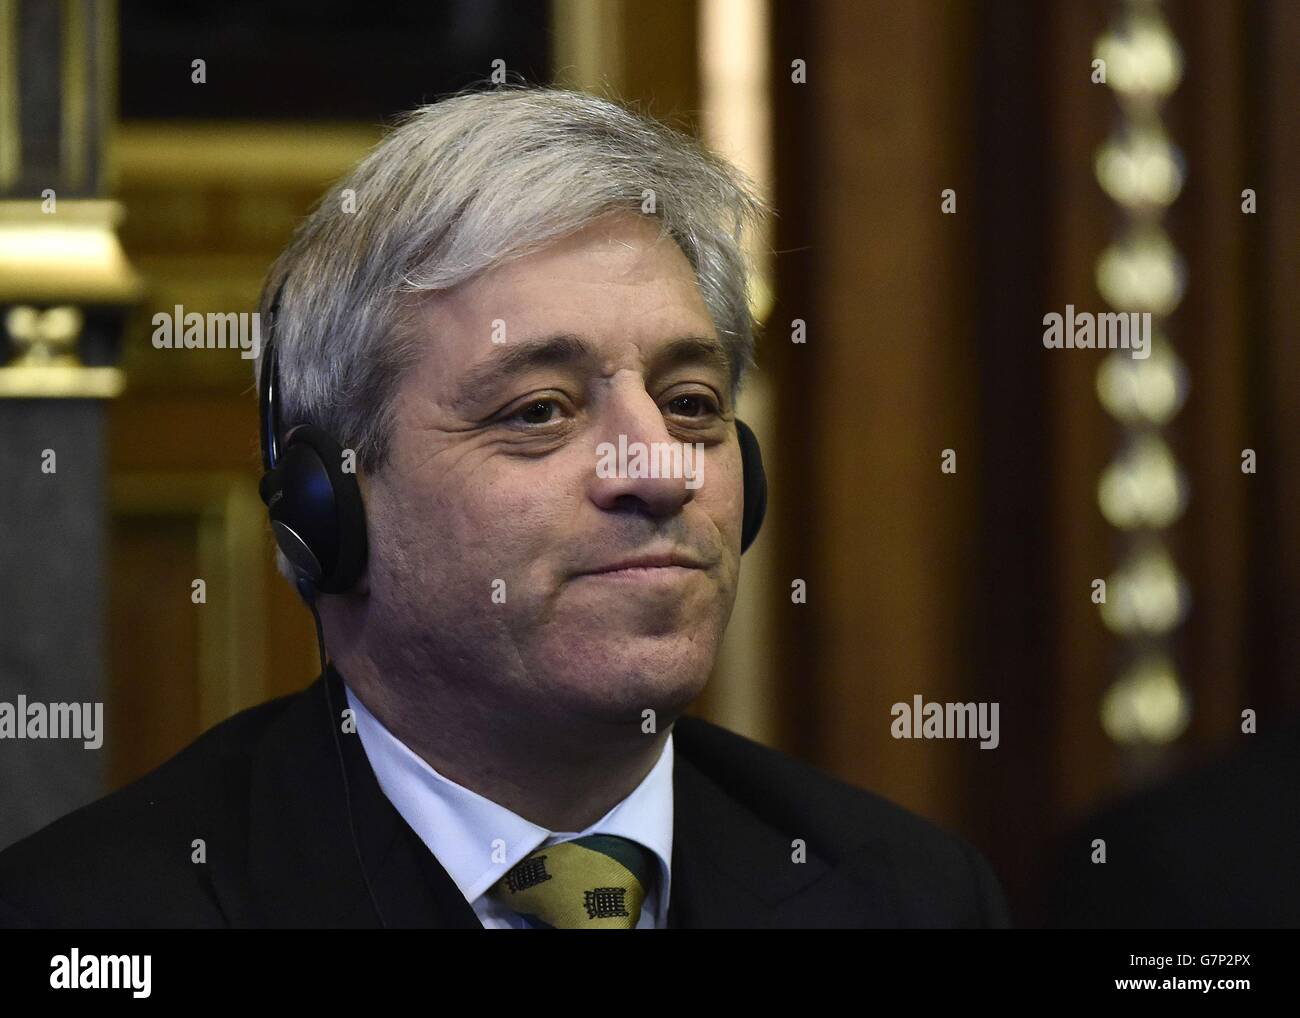 John Bercow, the Speaker of the House of Commons listens as Mexico's President Enrique Pena Nieto delivers an address to members of the British All-Party Parliamentary Group at the Houses of Parliament in London. The President and his wife are guests of Queen Elizabeth II during their three day state visit to Britain. Stock Photo